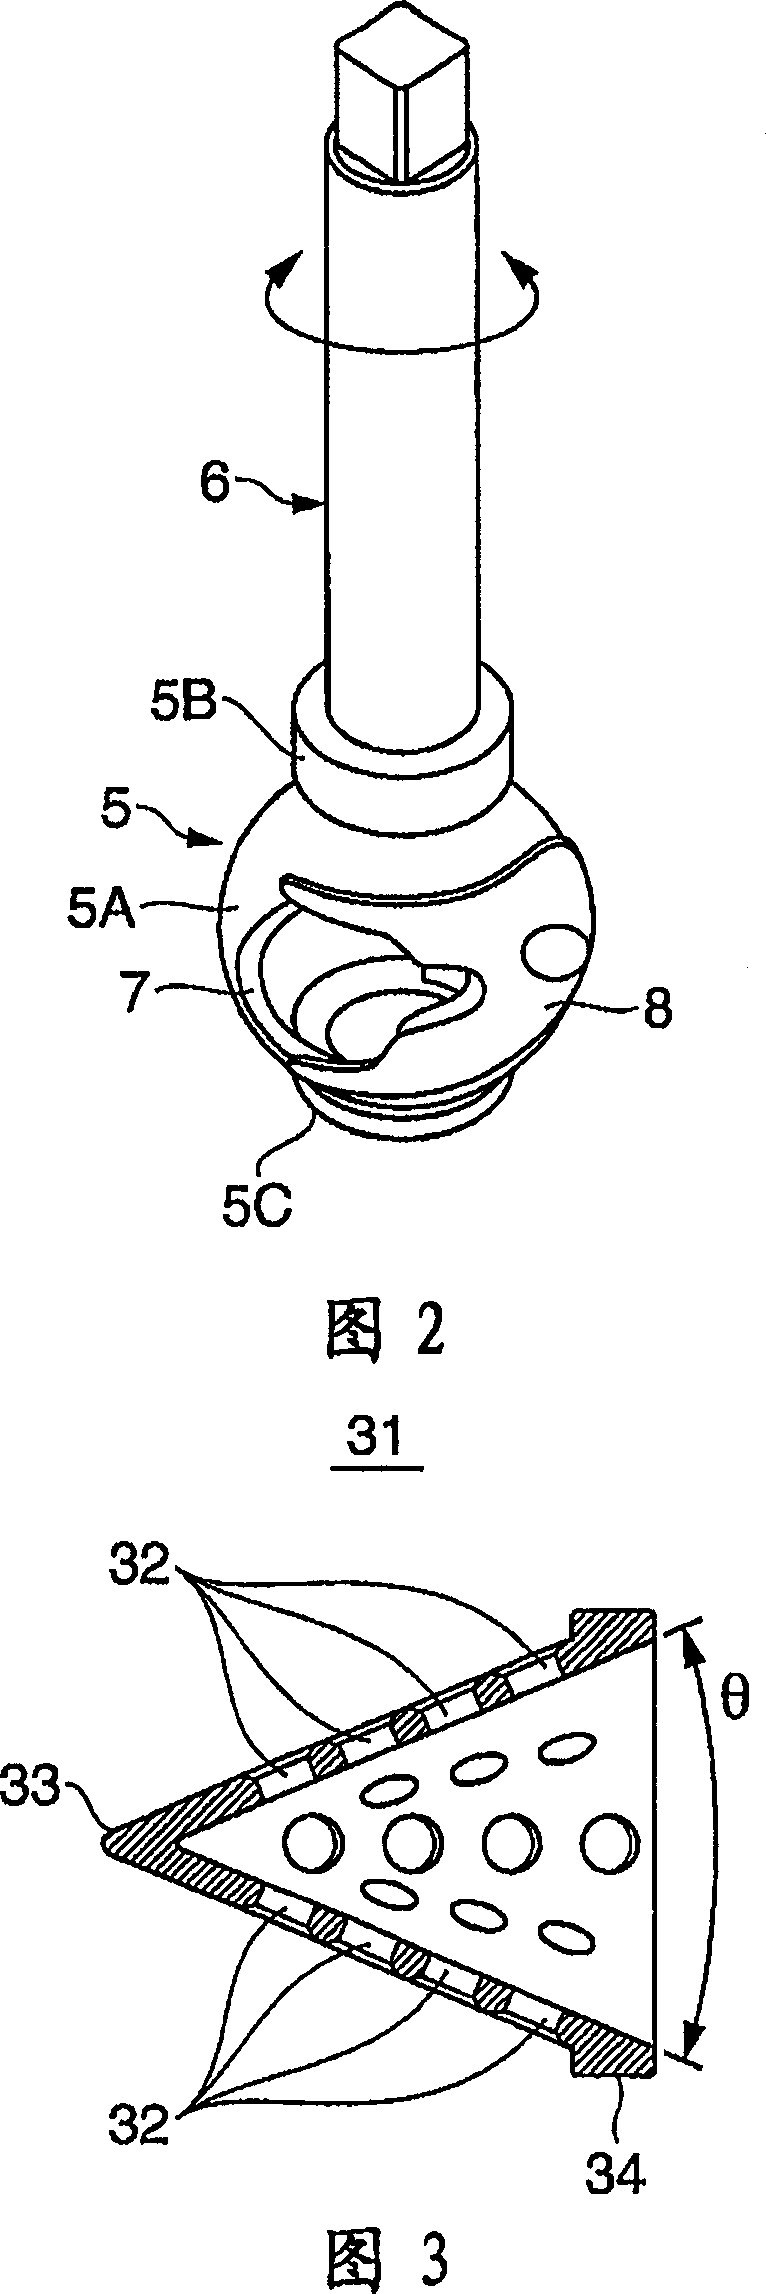 Diffuser for fluid control valve and fluid control valve